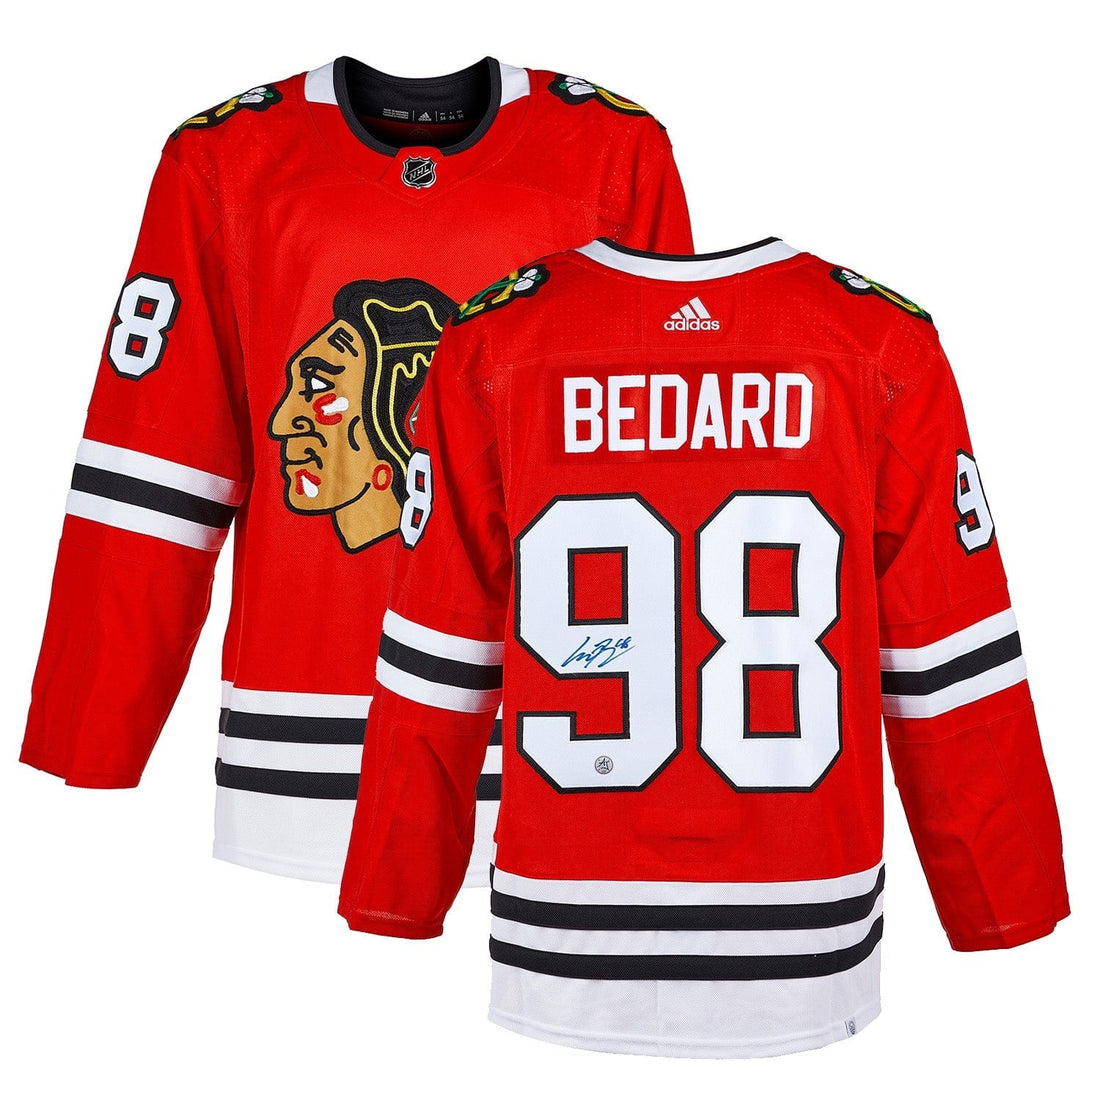 Connor Bedard autographed Chicago Blackhawks pro jersey red